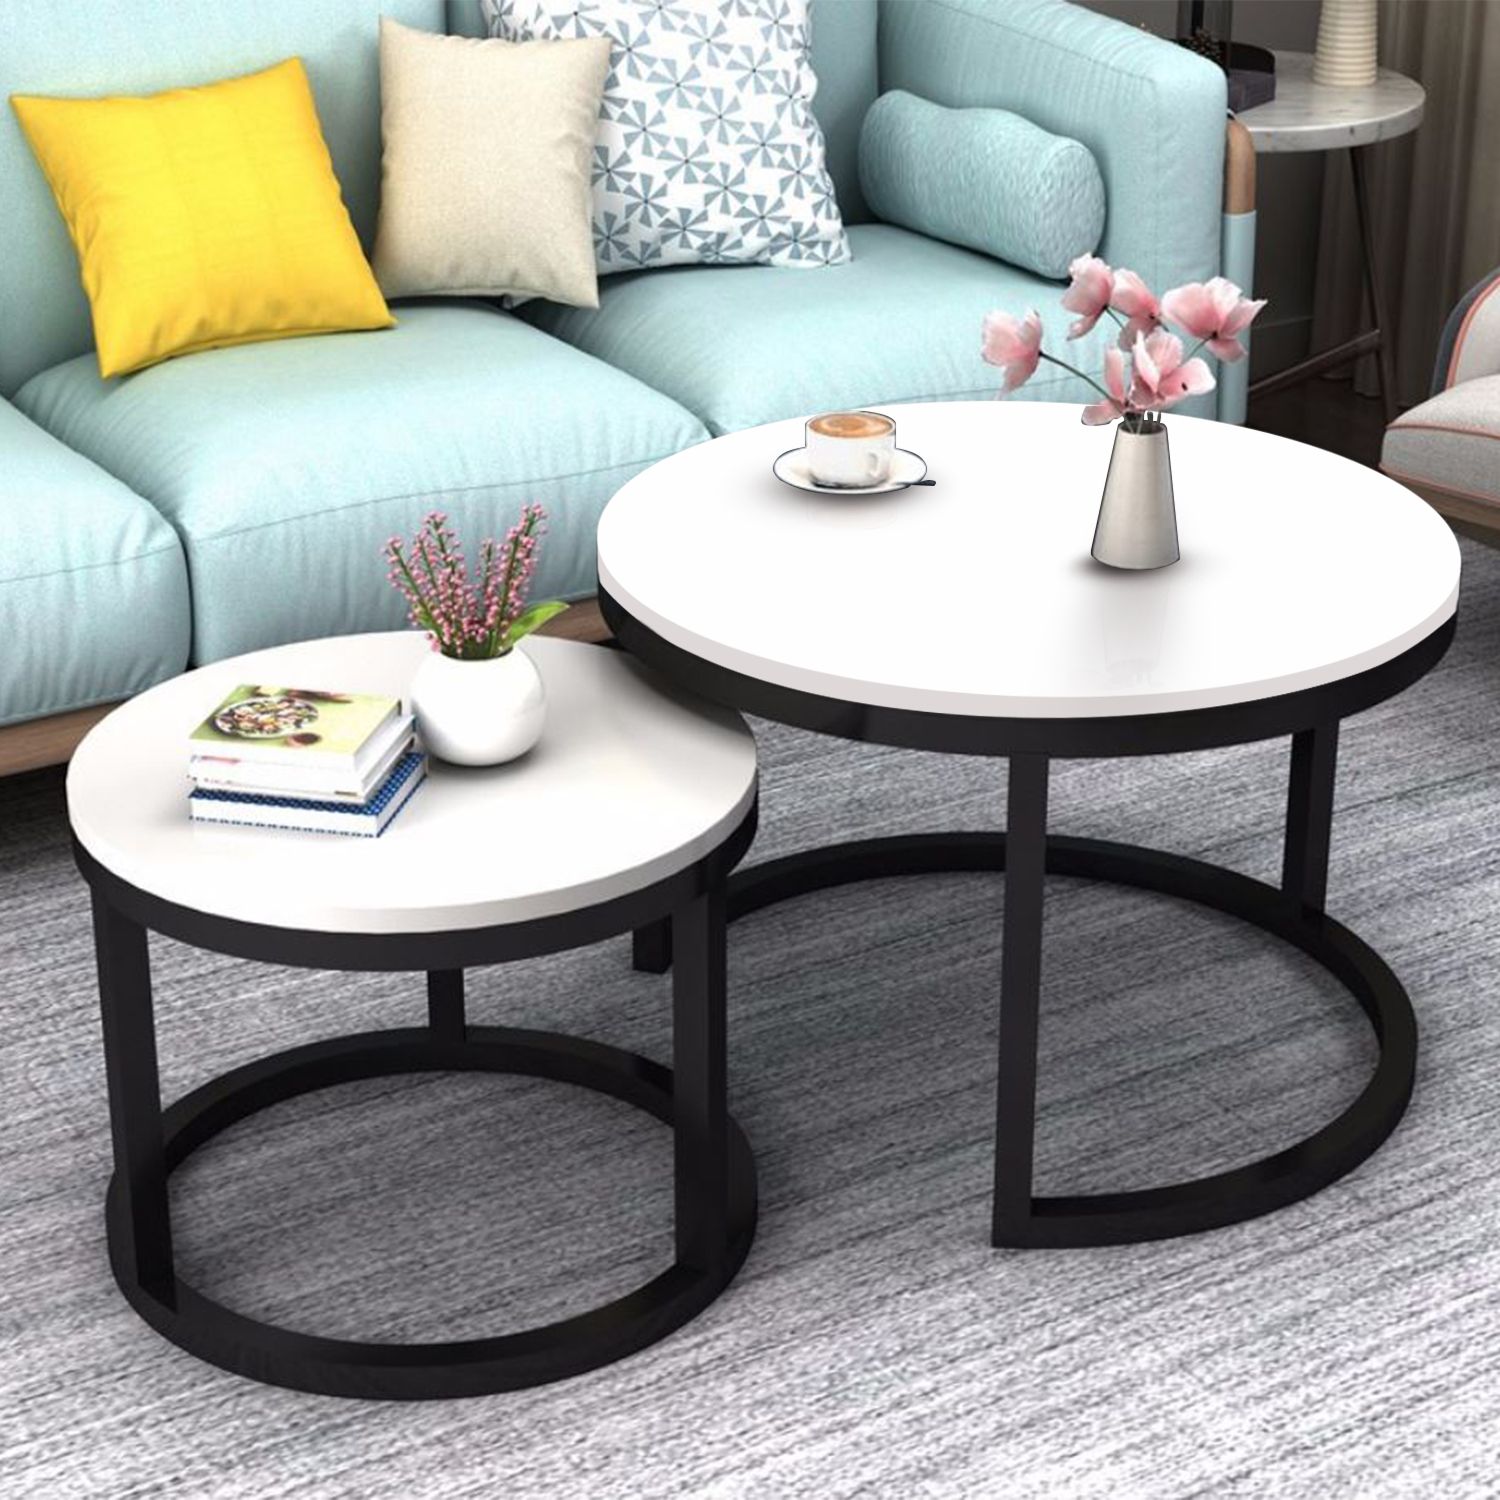 2 Round Tea Table Coffee Table Desk Sets | White – Twin Sets Multi With White Outdoor Cocktail Table And Chair Sets (View 6 of 15)